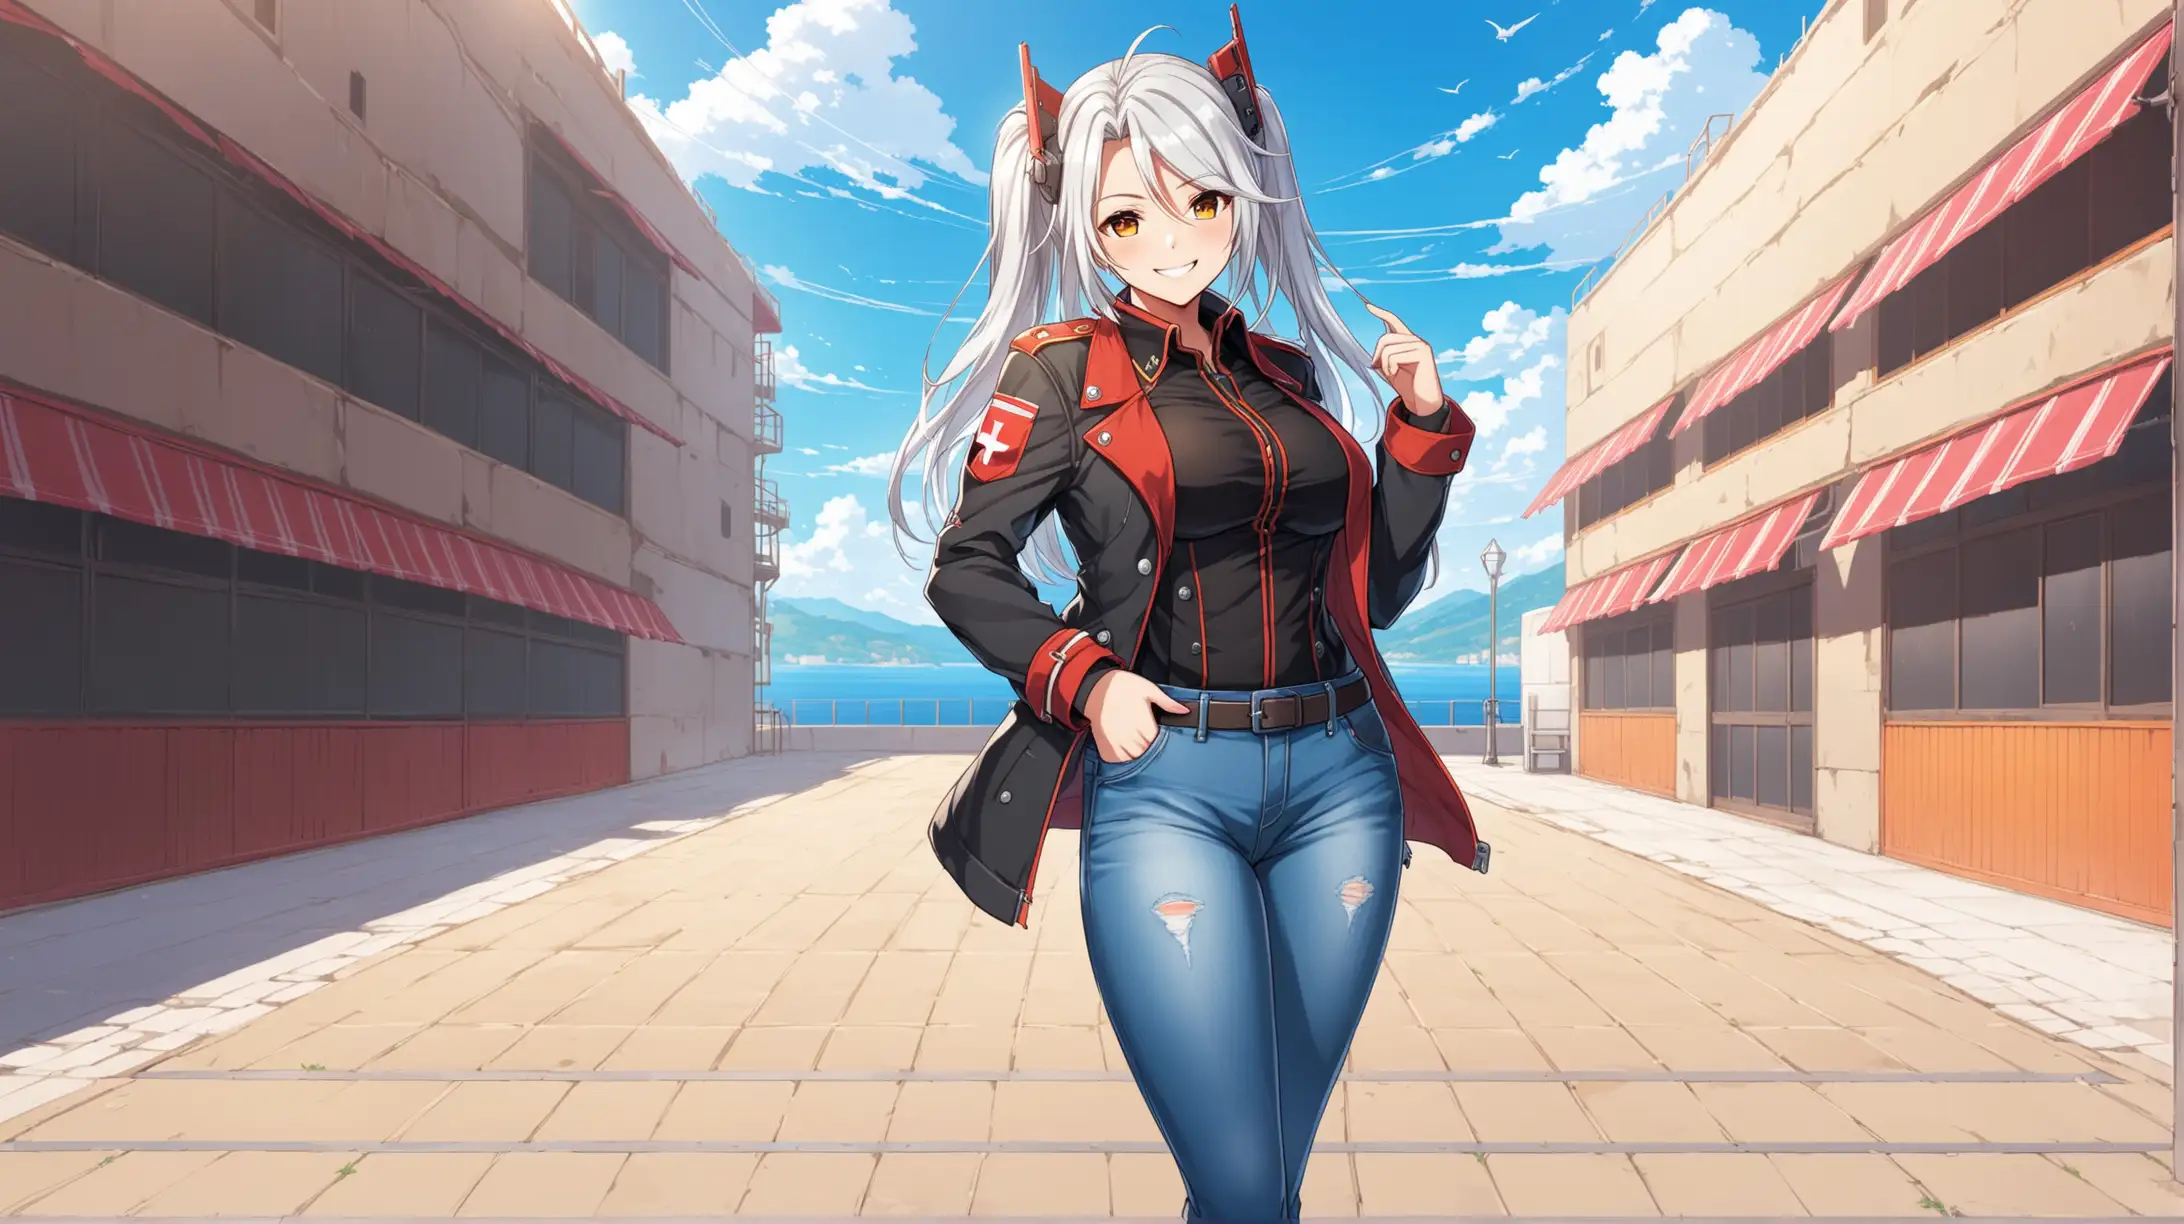 Smiling Prinz Eugen from Azur Lane in Casual Attire Outdoors